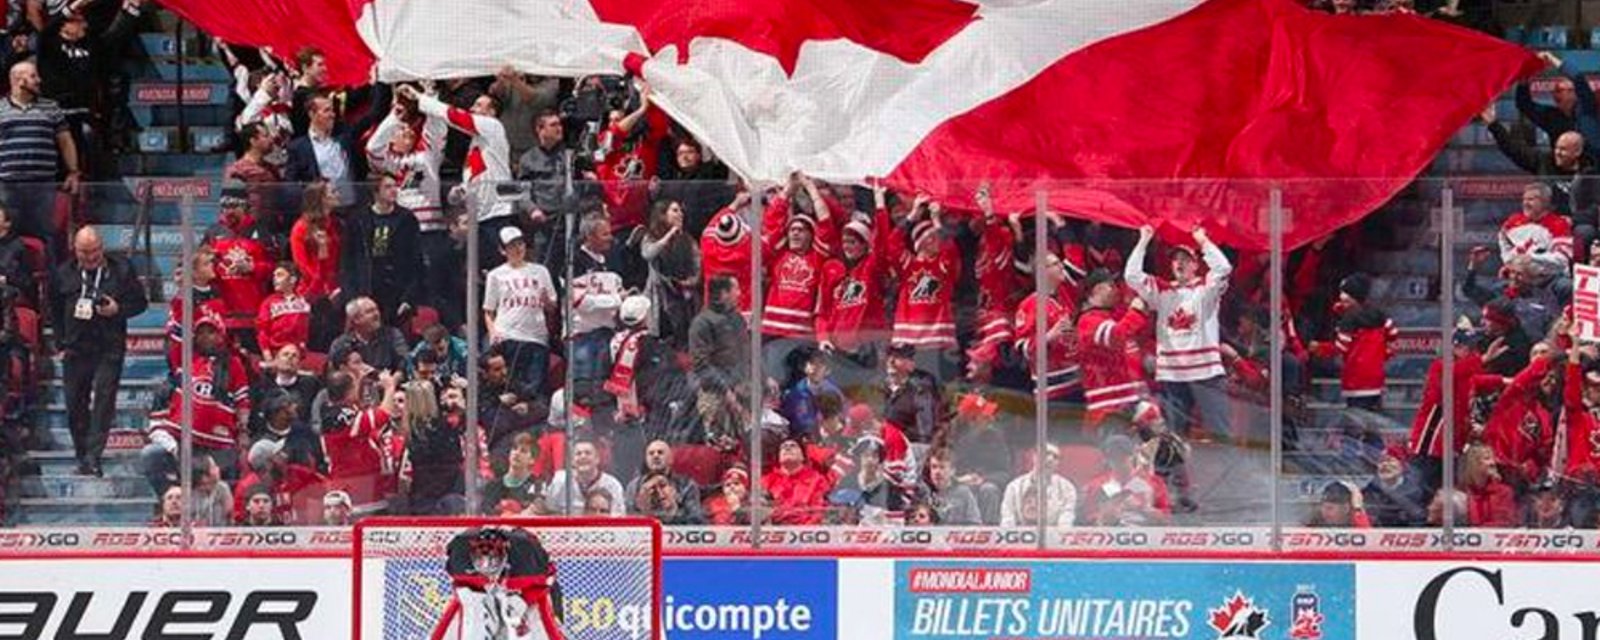 Canada suffers another blow due to restrictions, NHL draft prospect showcase headed to USA